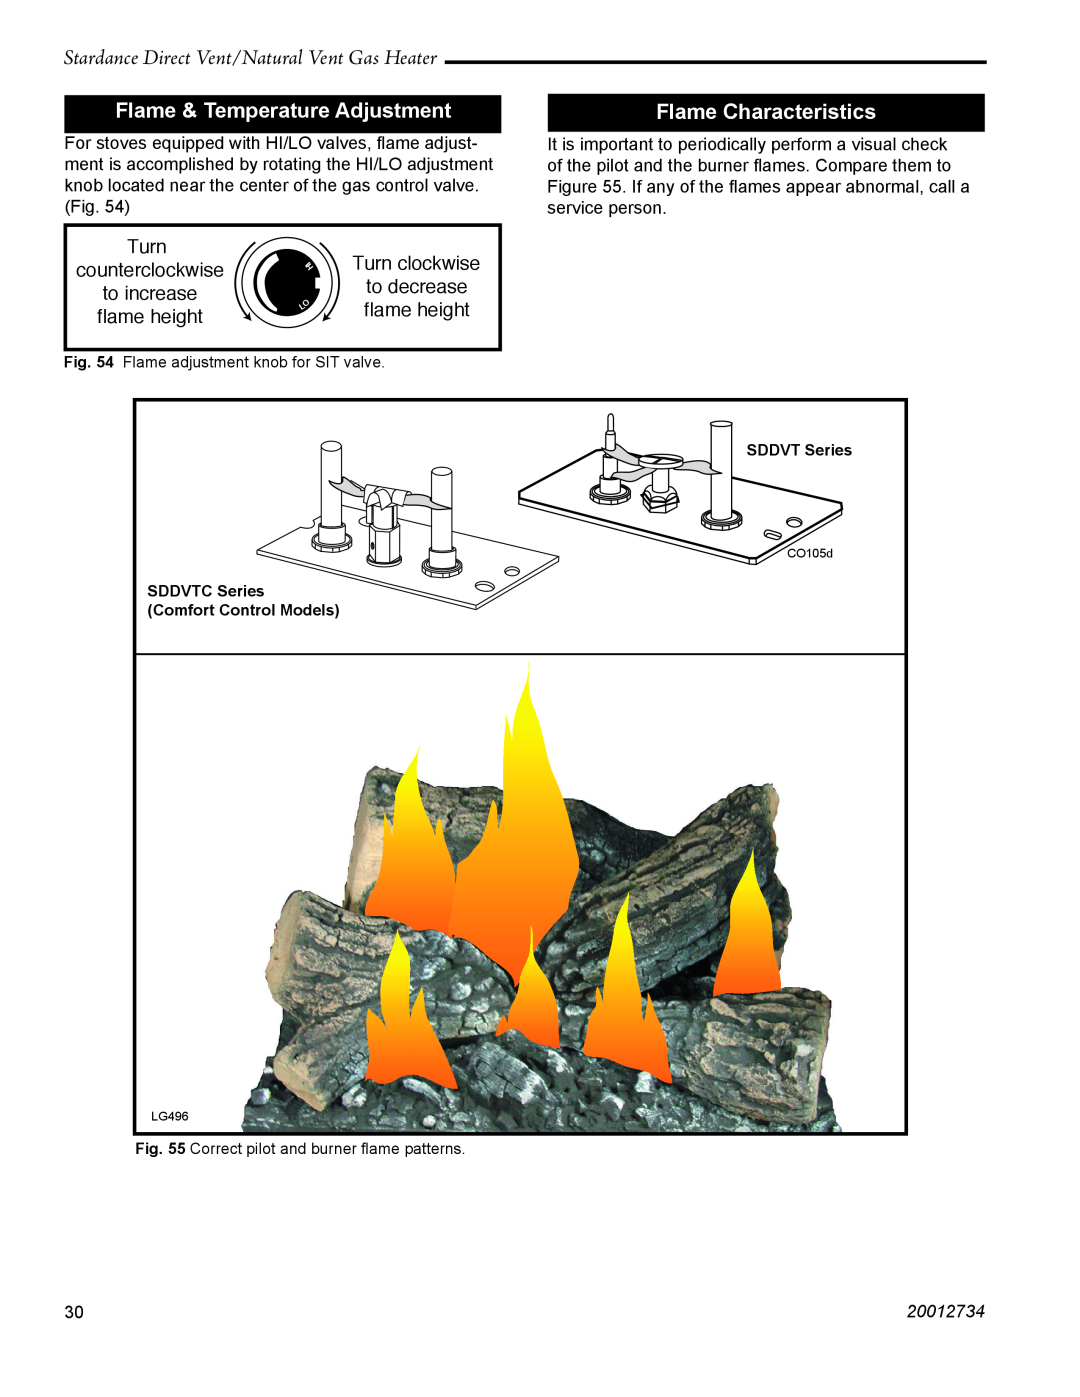 Vermont Casting SDDVT manual Flame & Temperature Adjustment, Flame Characteristics, Turn clockwise to decrease flame height 